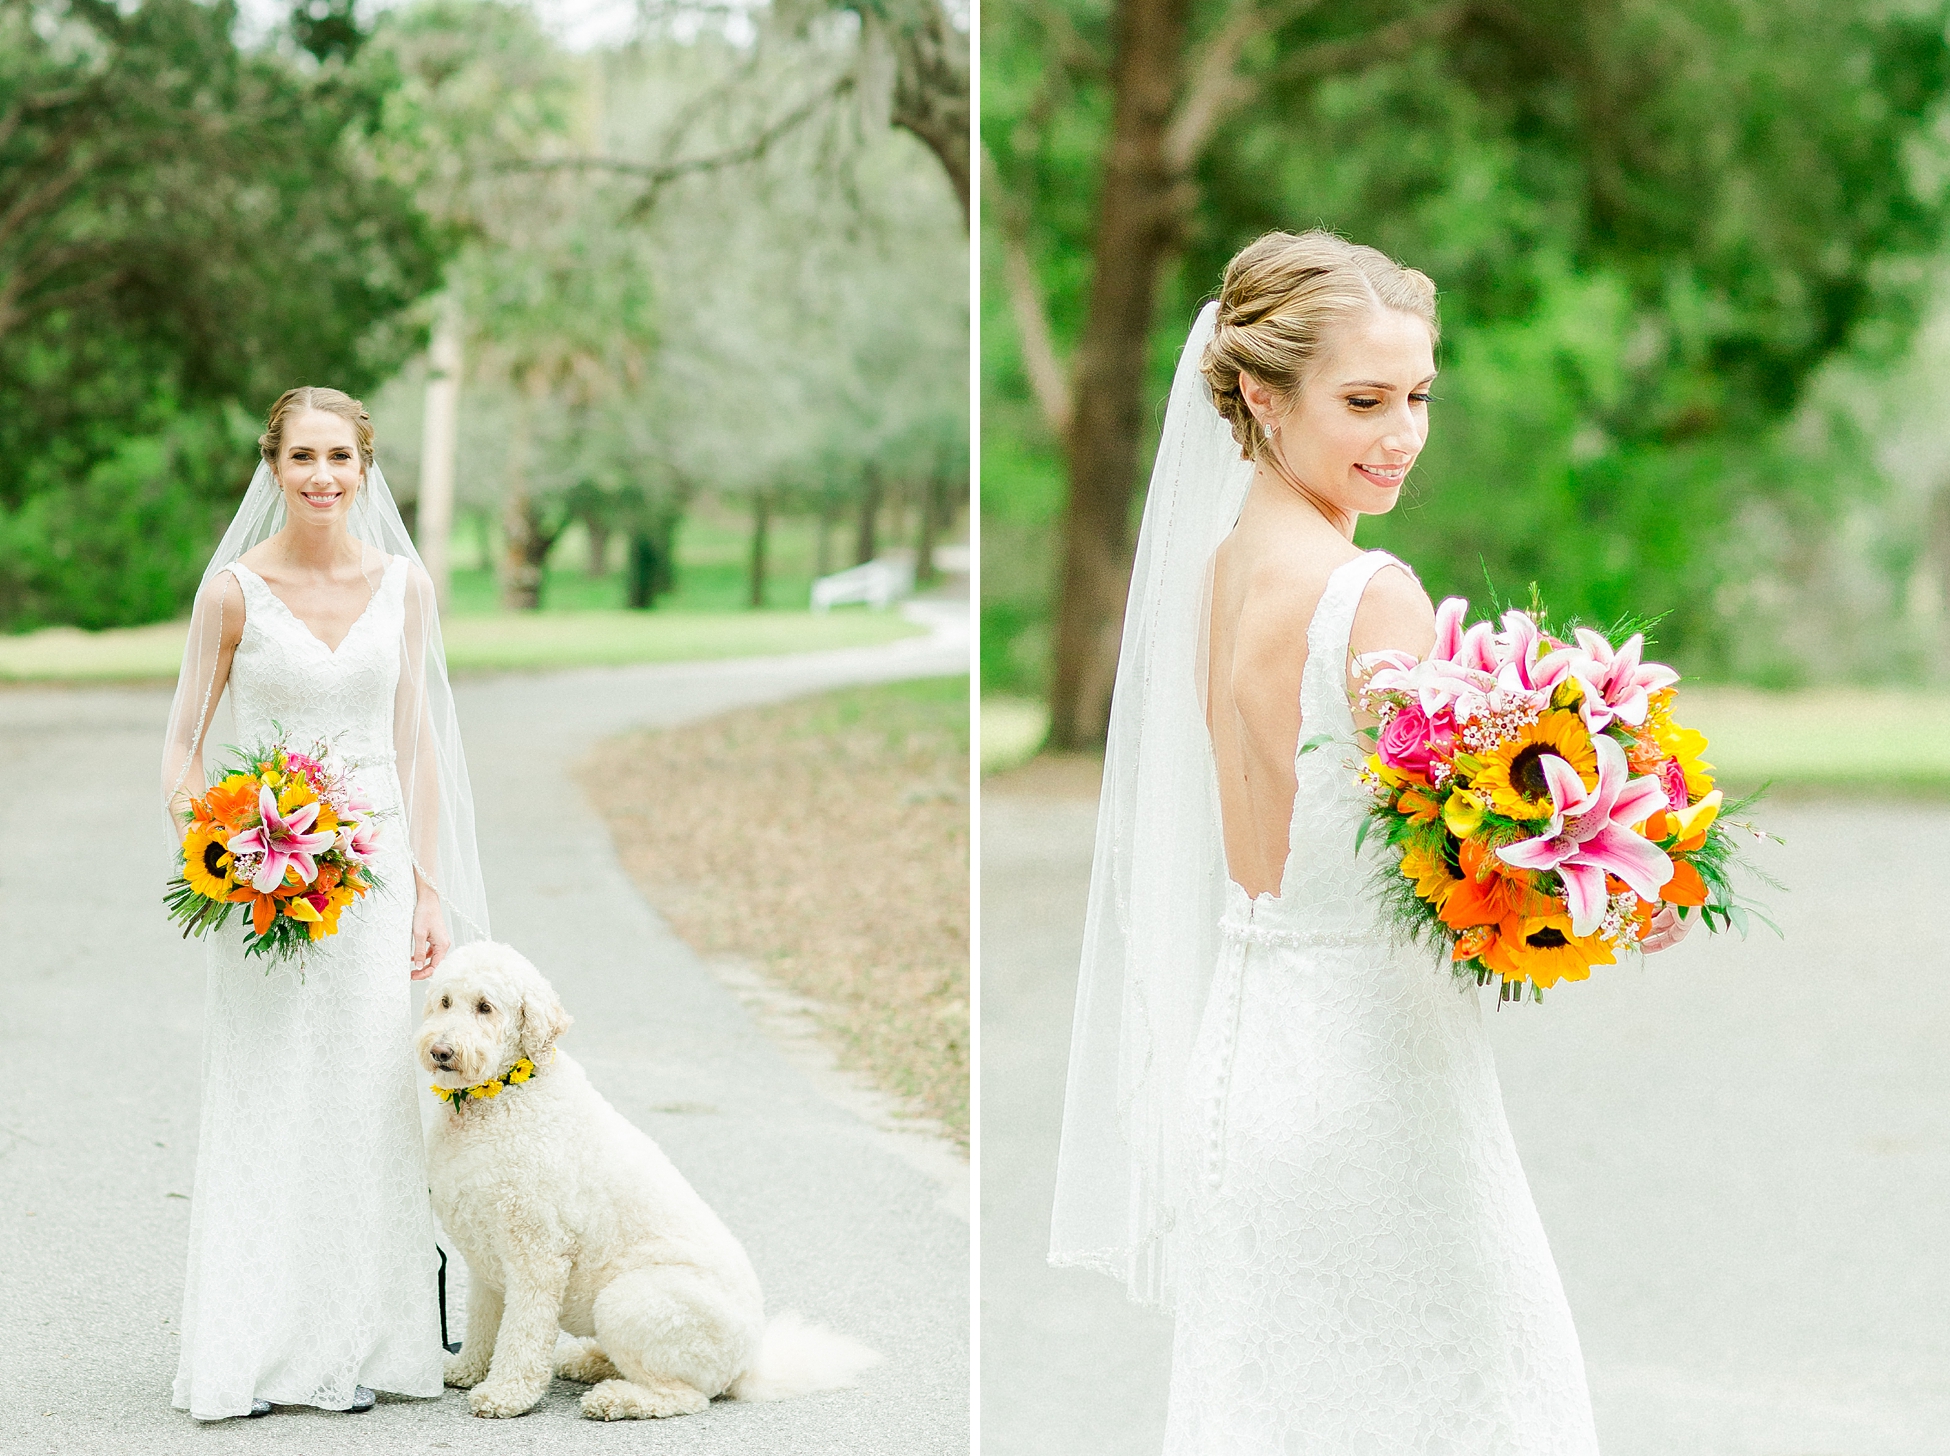 Tampa Wedding Photographer | @ Ailyn La Torre Photography 2019